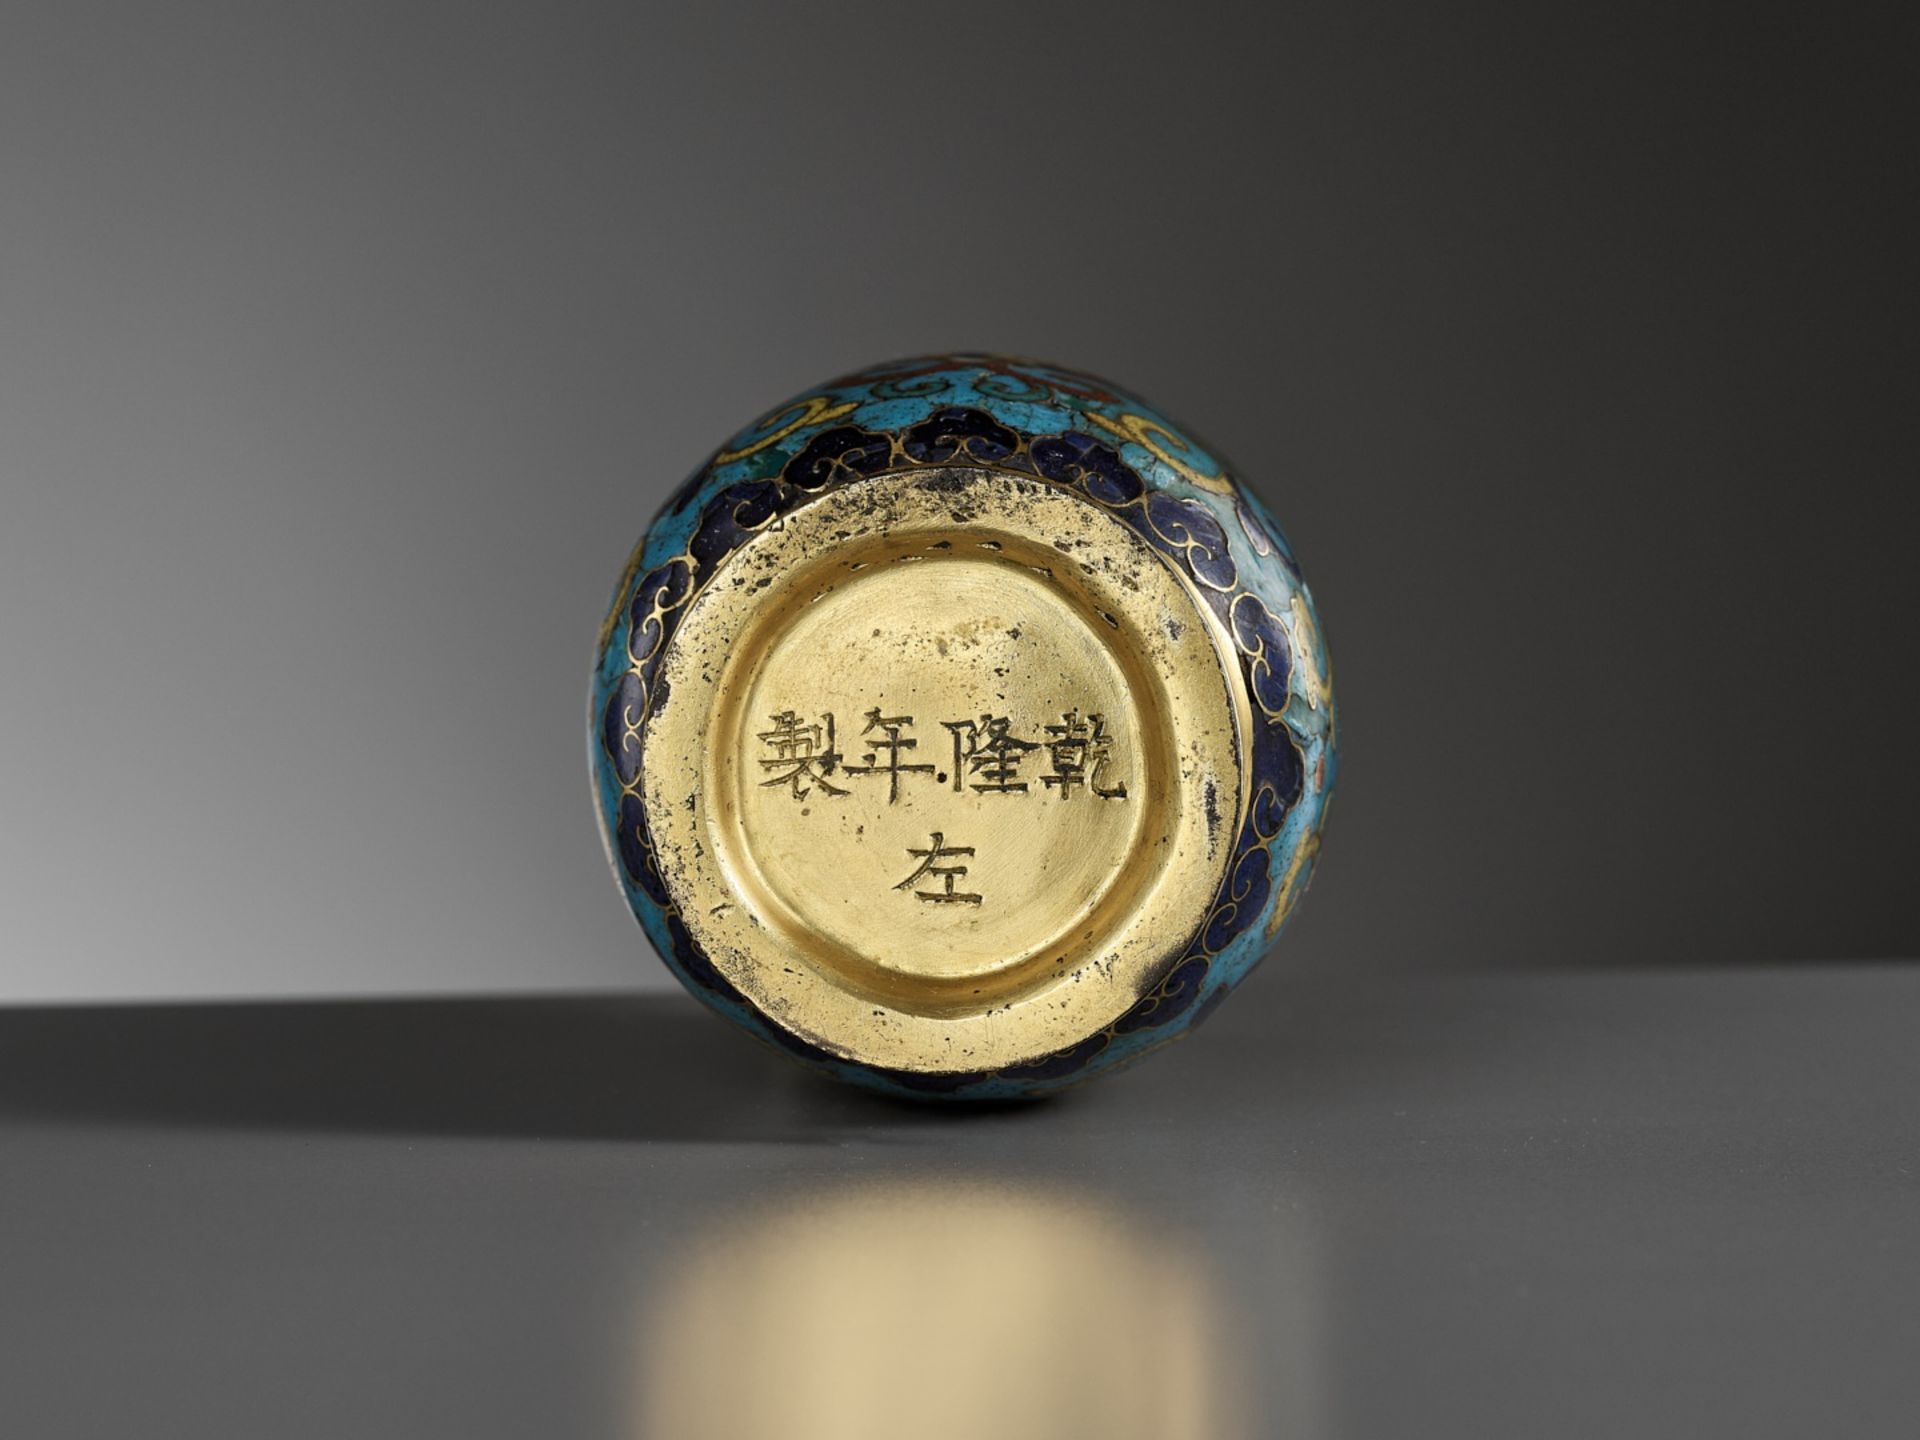 A CLOISONNE ENAMEL MALLET VASE, QIANLONG FIVE-CHARACTER MARK AND OF THE PERIOD - Image 13 of 14